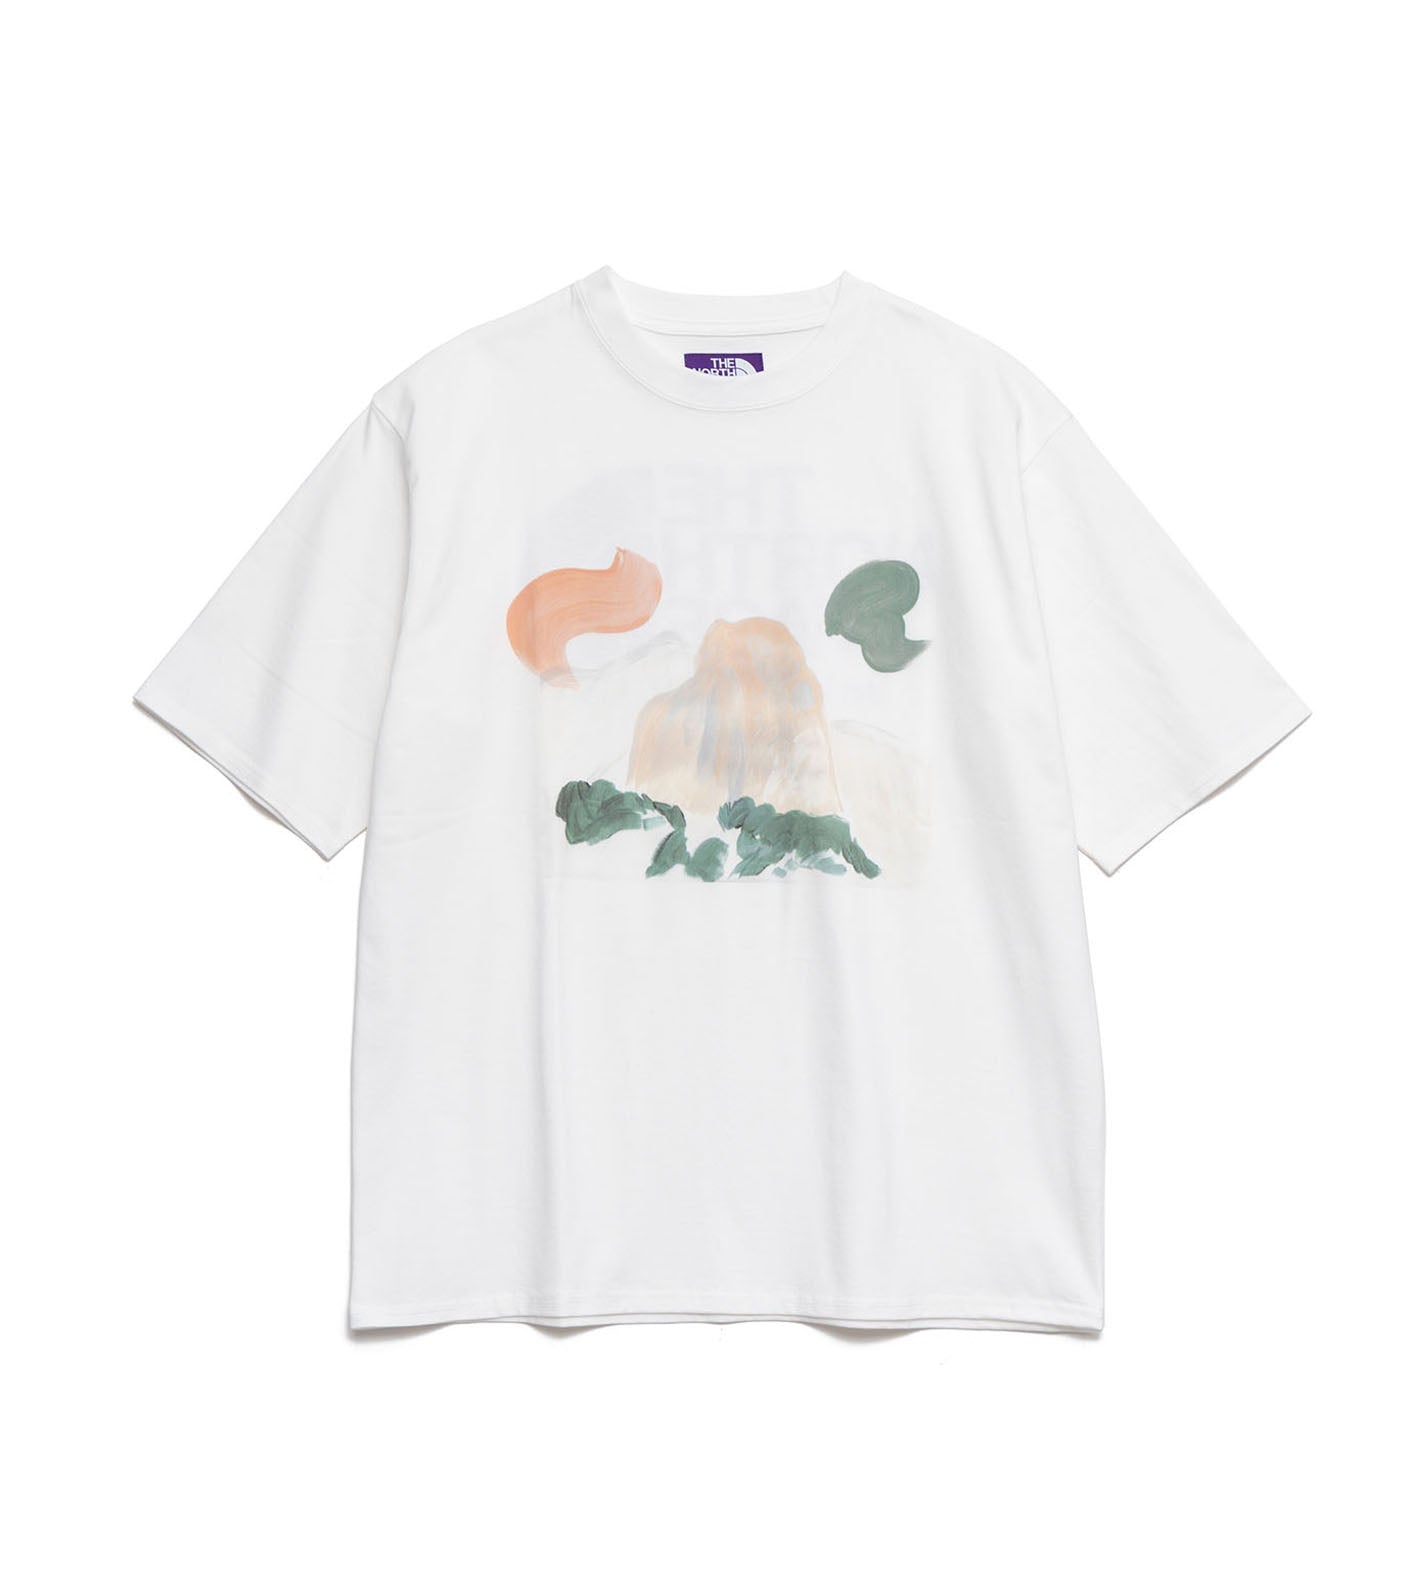 THE NORTH FACE PURPLE LABEL HS Graphic Tee